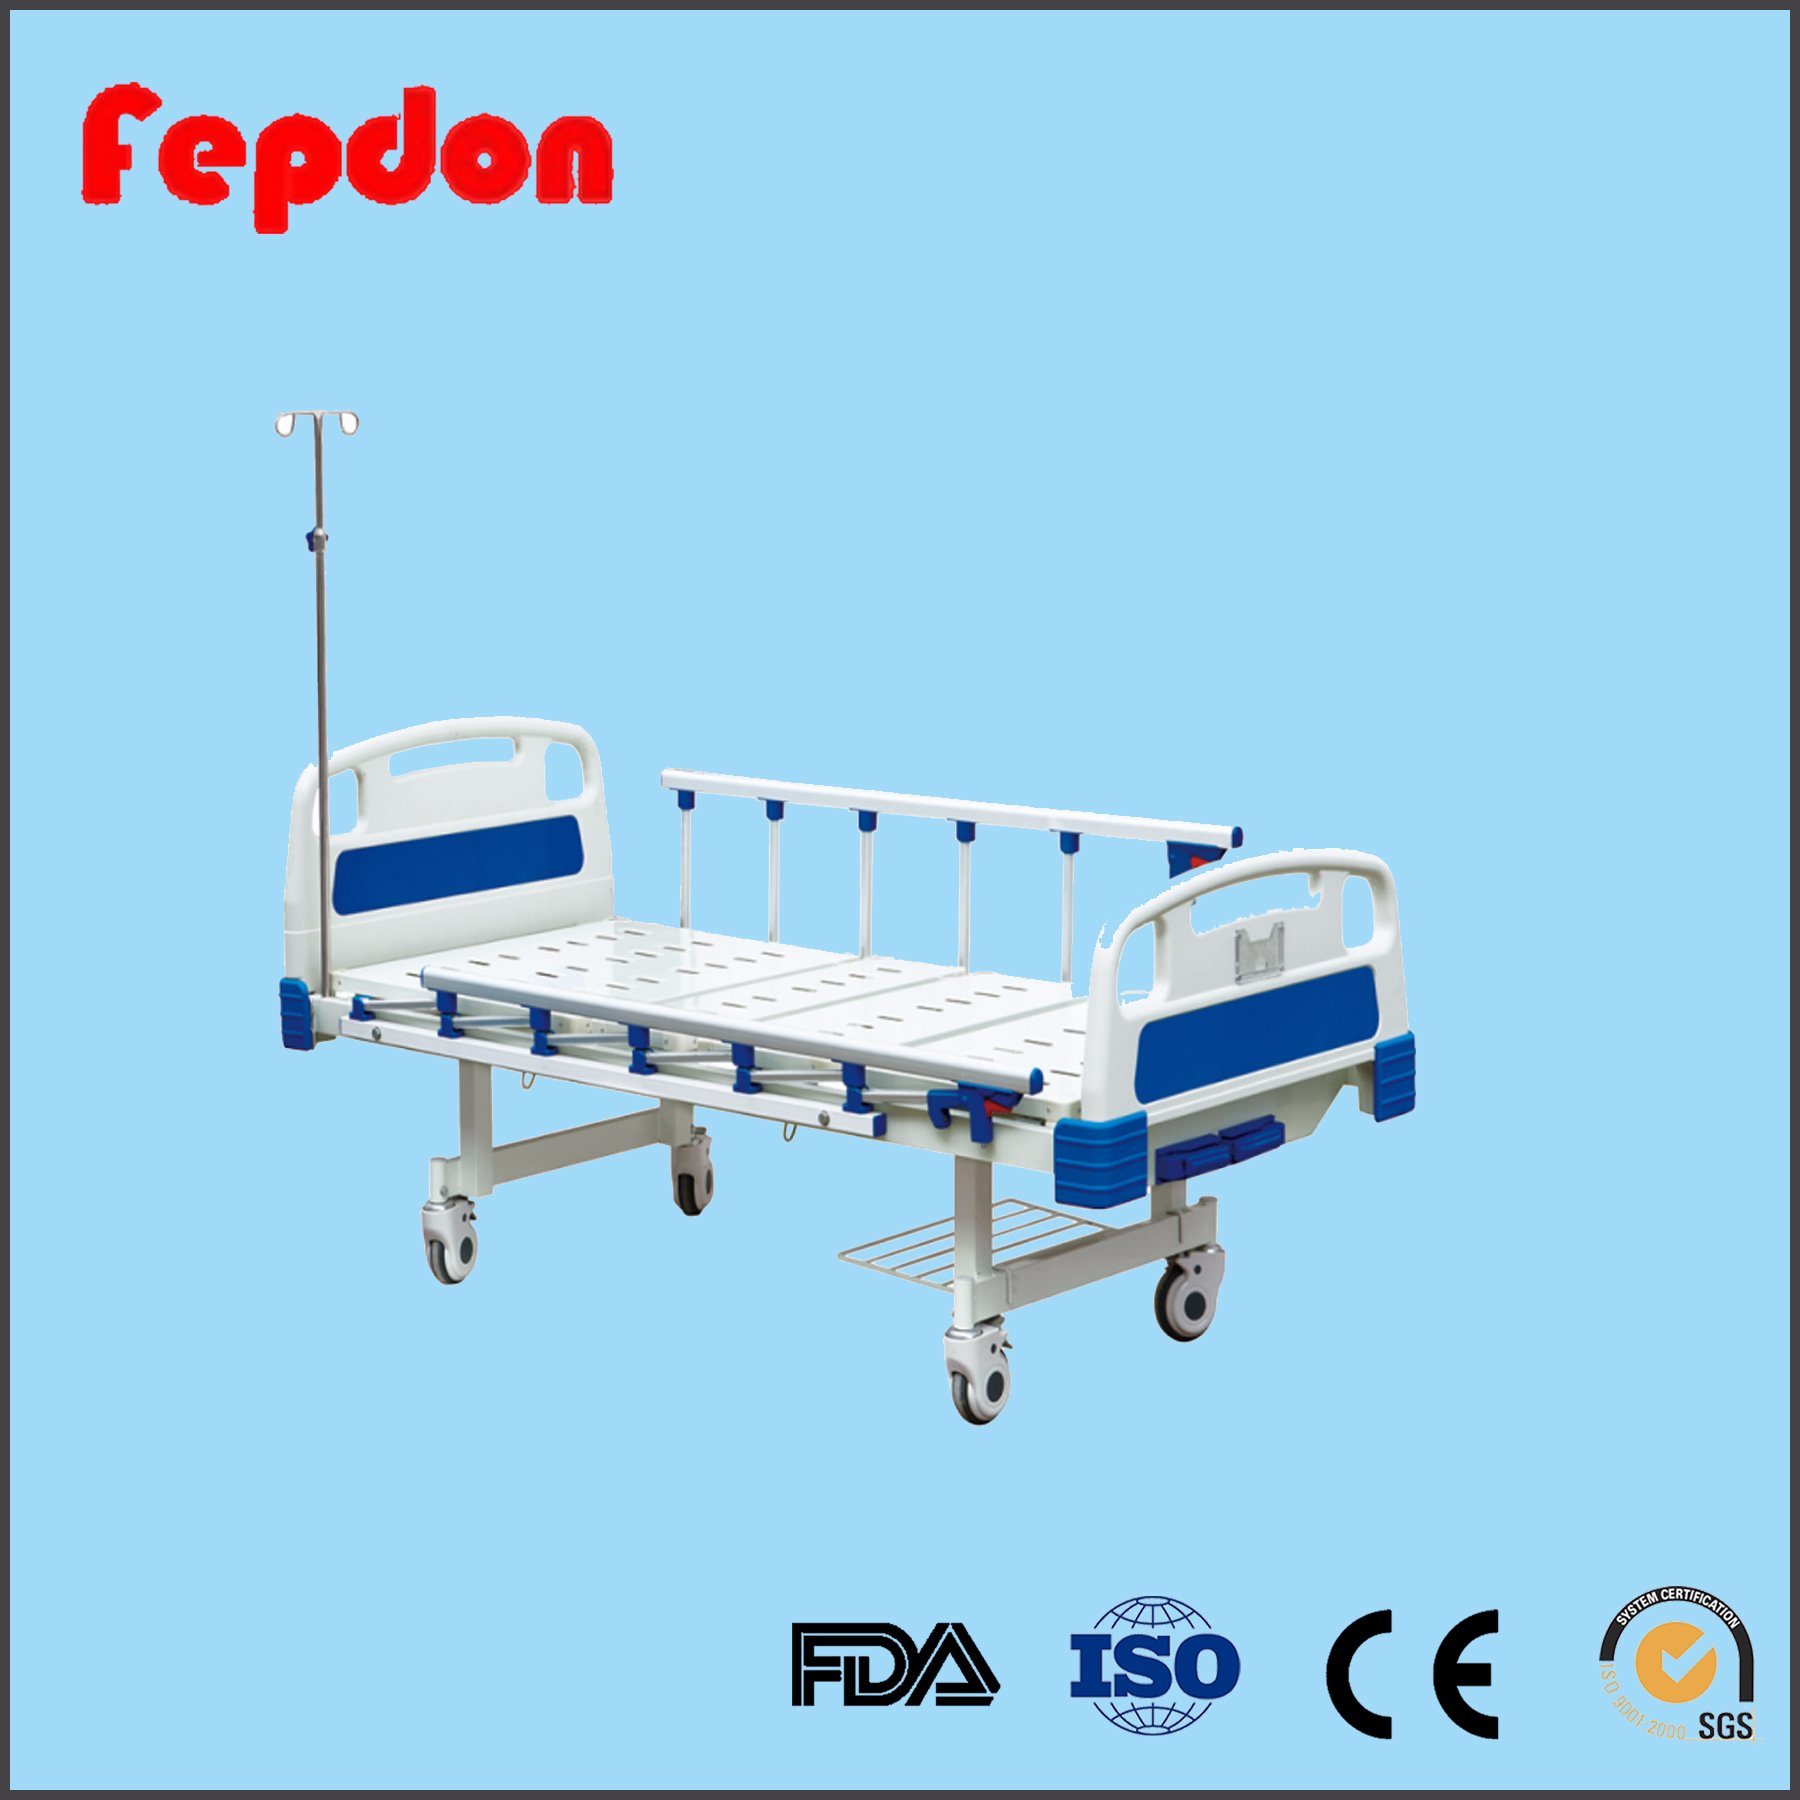 Manual Operated Two Function Manual Hospital Bed Patient Bed (HF-828A)